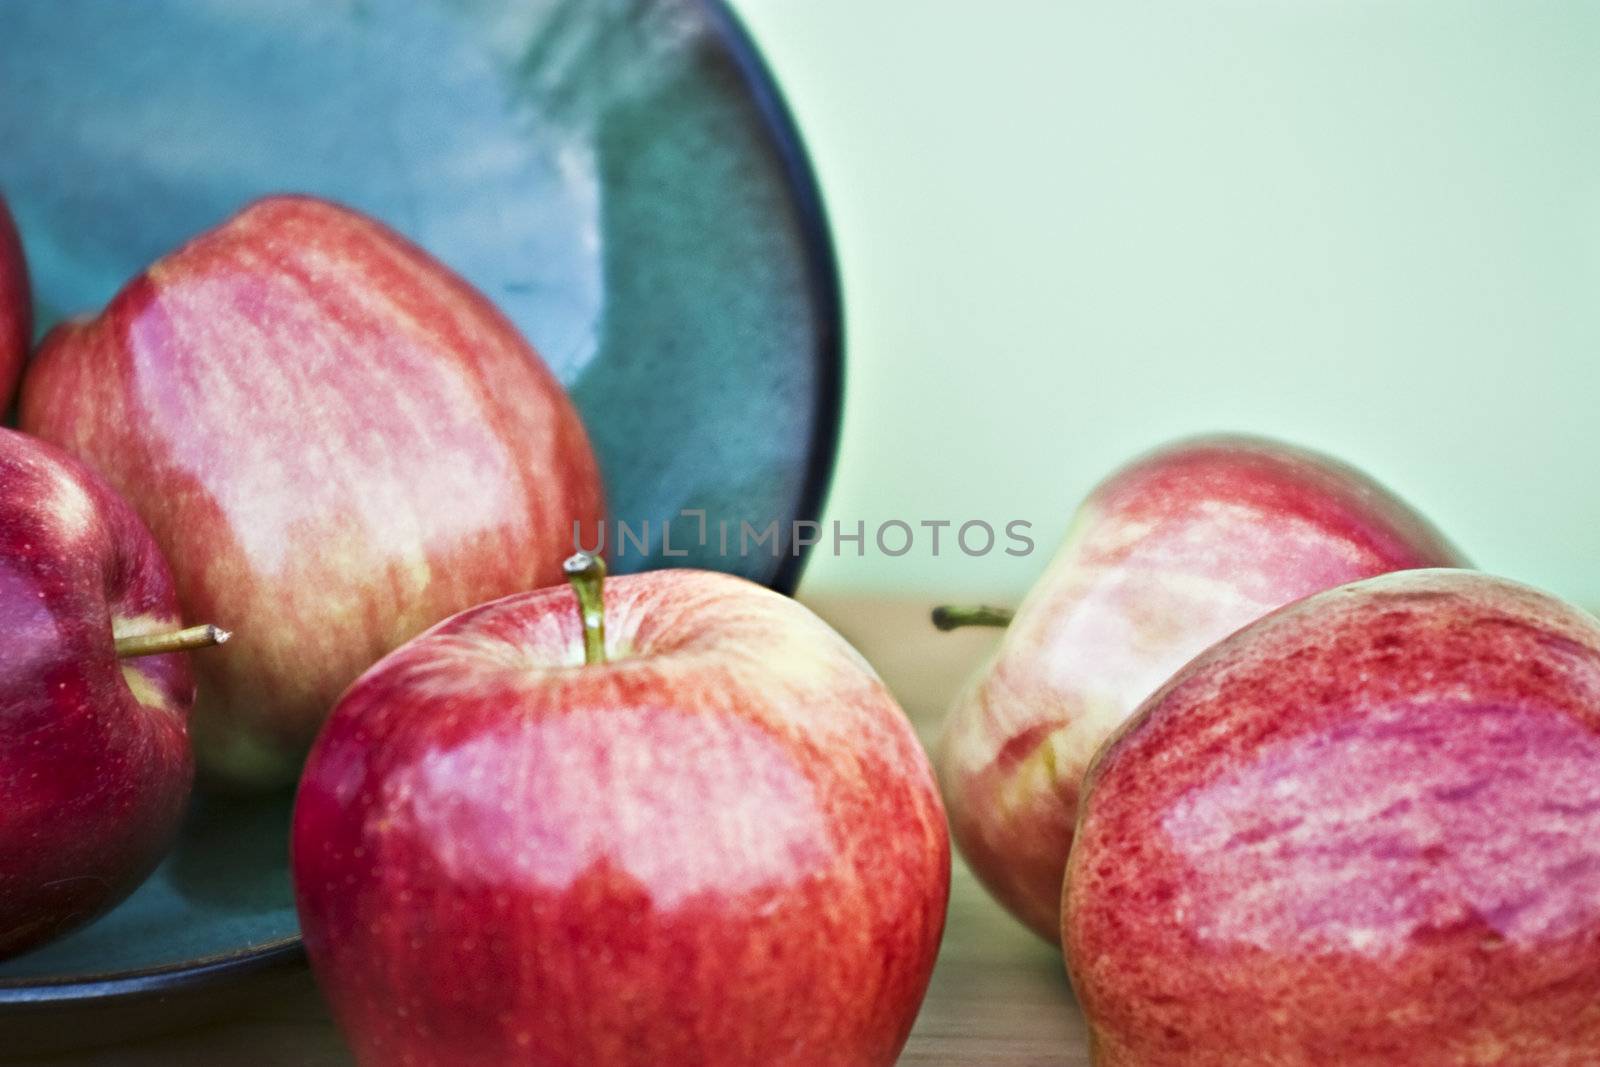 Red apples by StephanieFrey